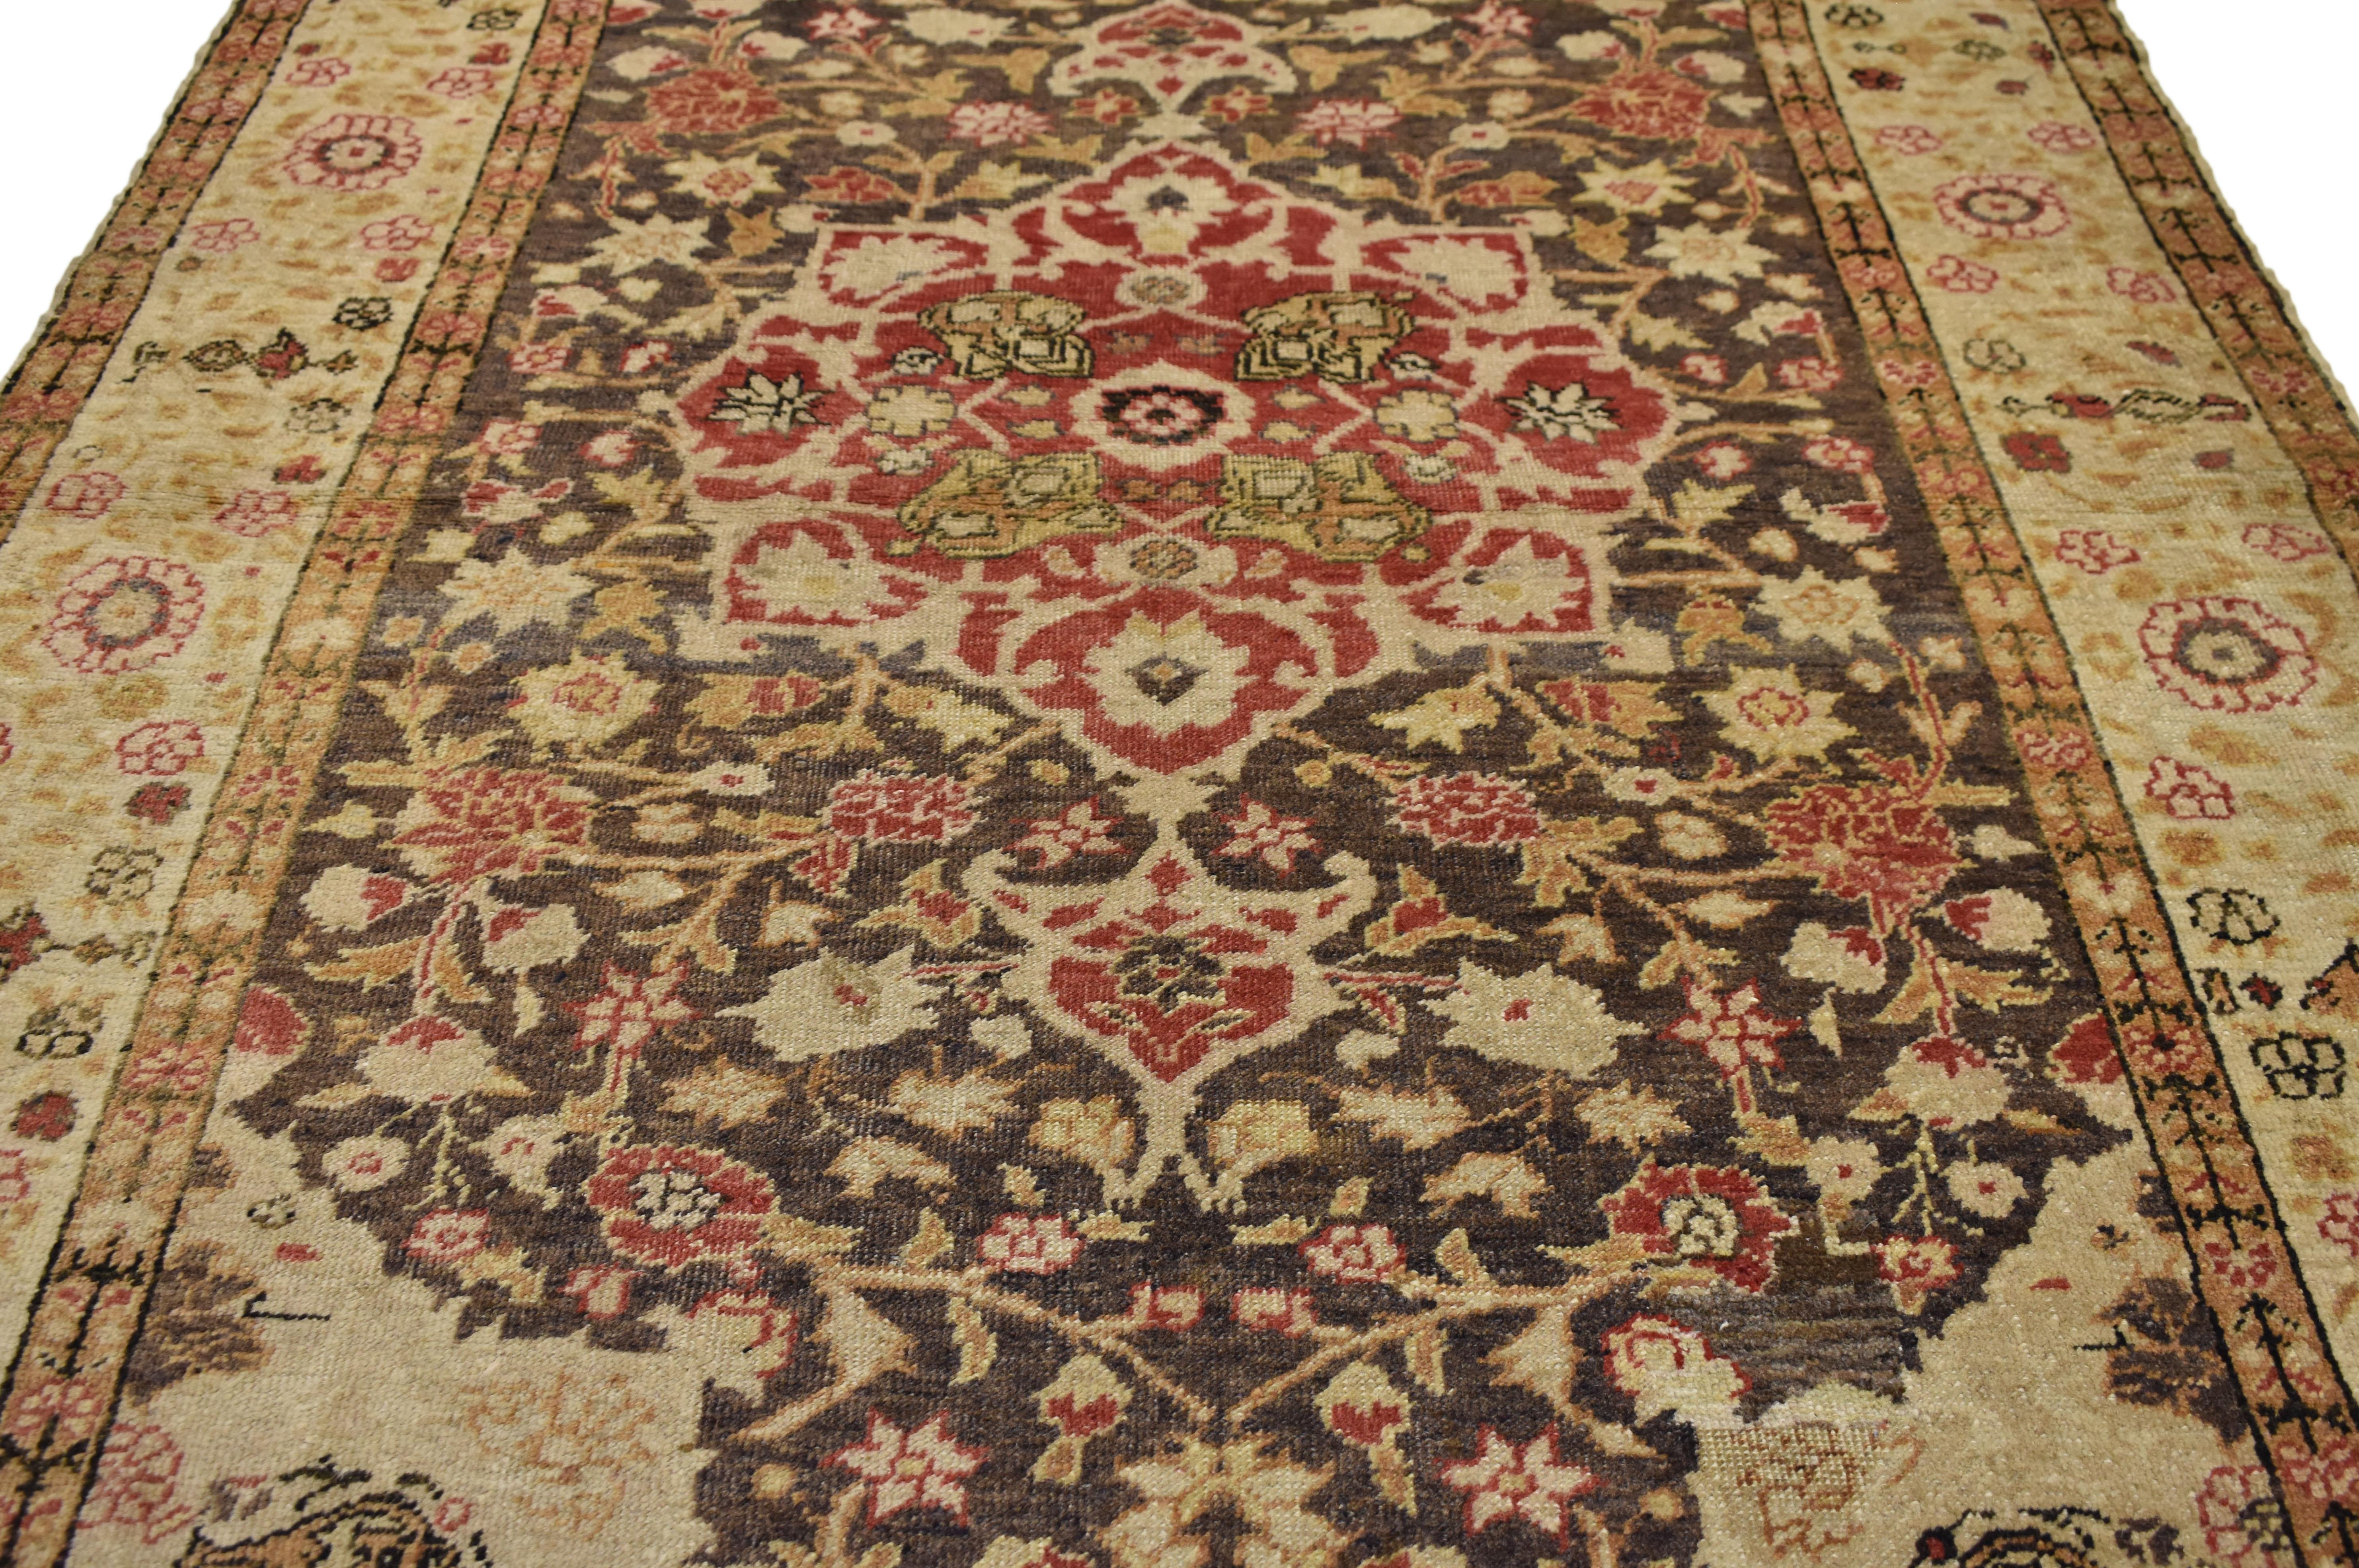 50639, a vintage Turkish Sivas accent rug. This eye-catching example of a Sivas in a Classic all-over medallion pattern. The Turkish rug features a central medallion in scarlet red covered in angular vines of creamy beige dotted with lush saffron